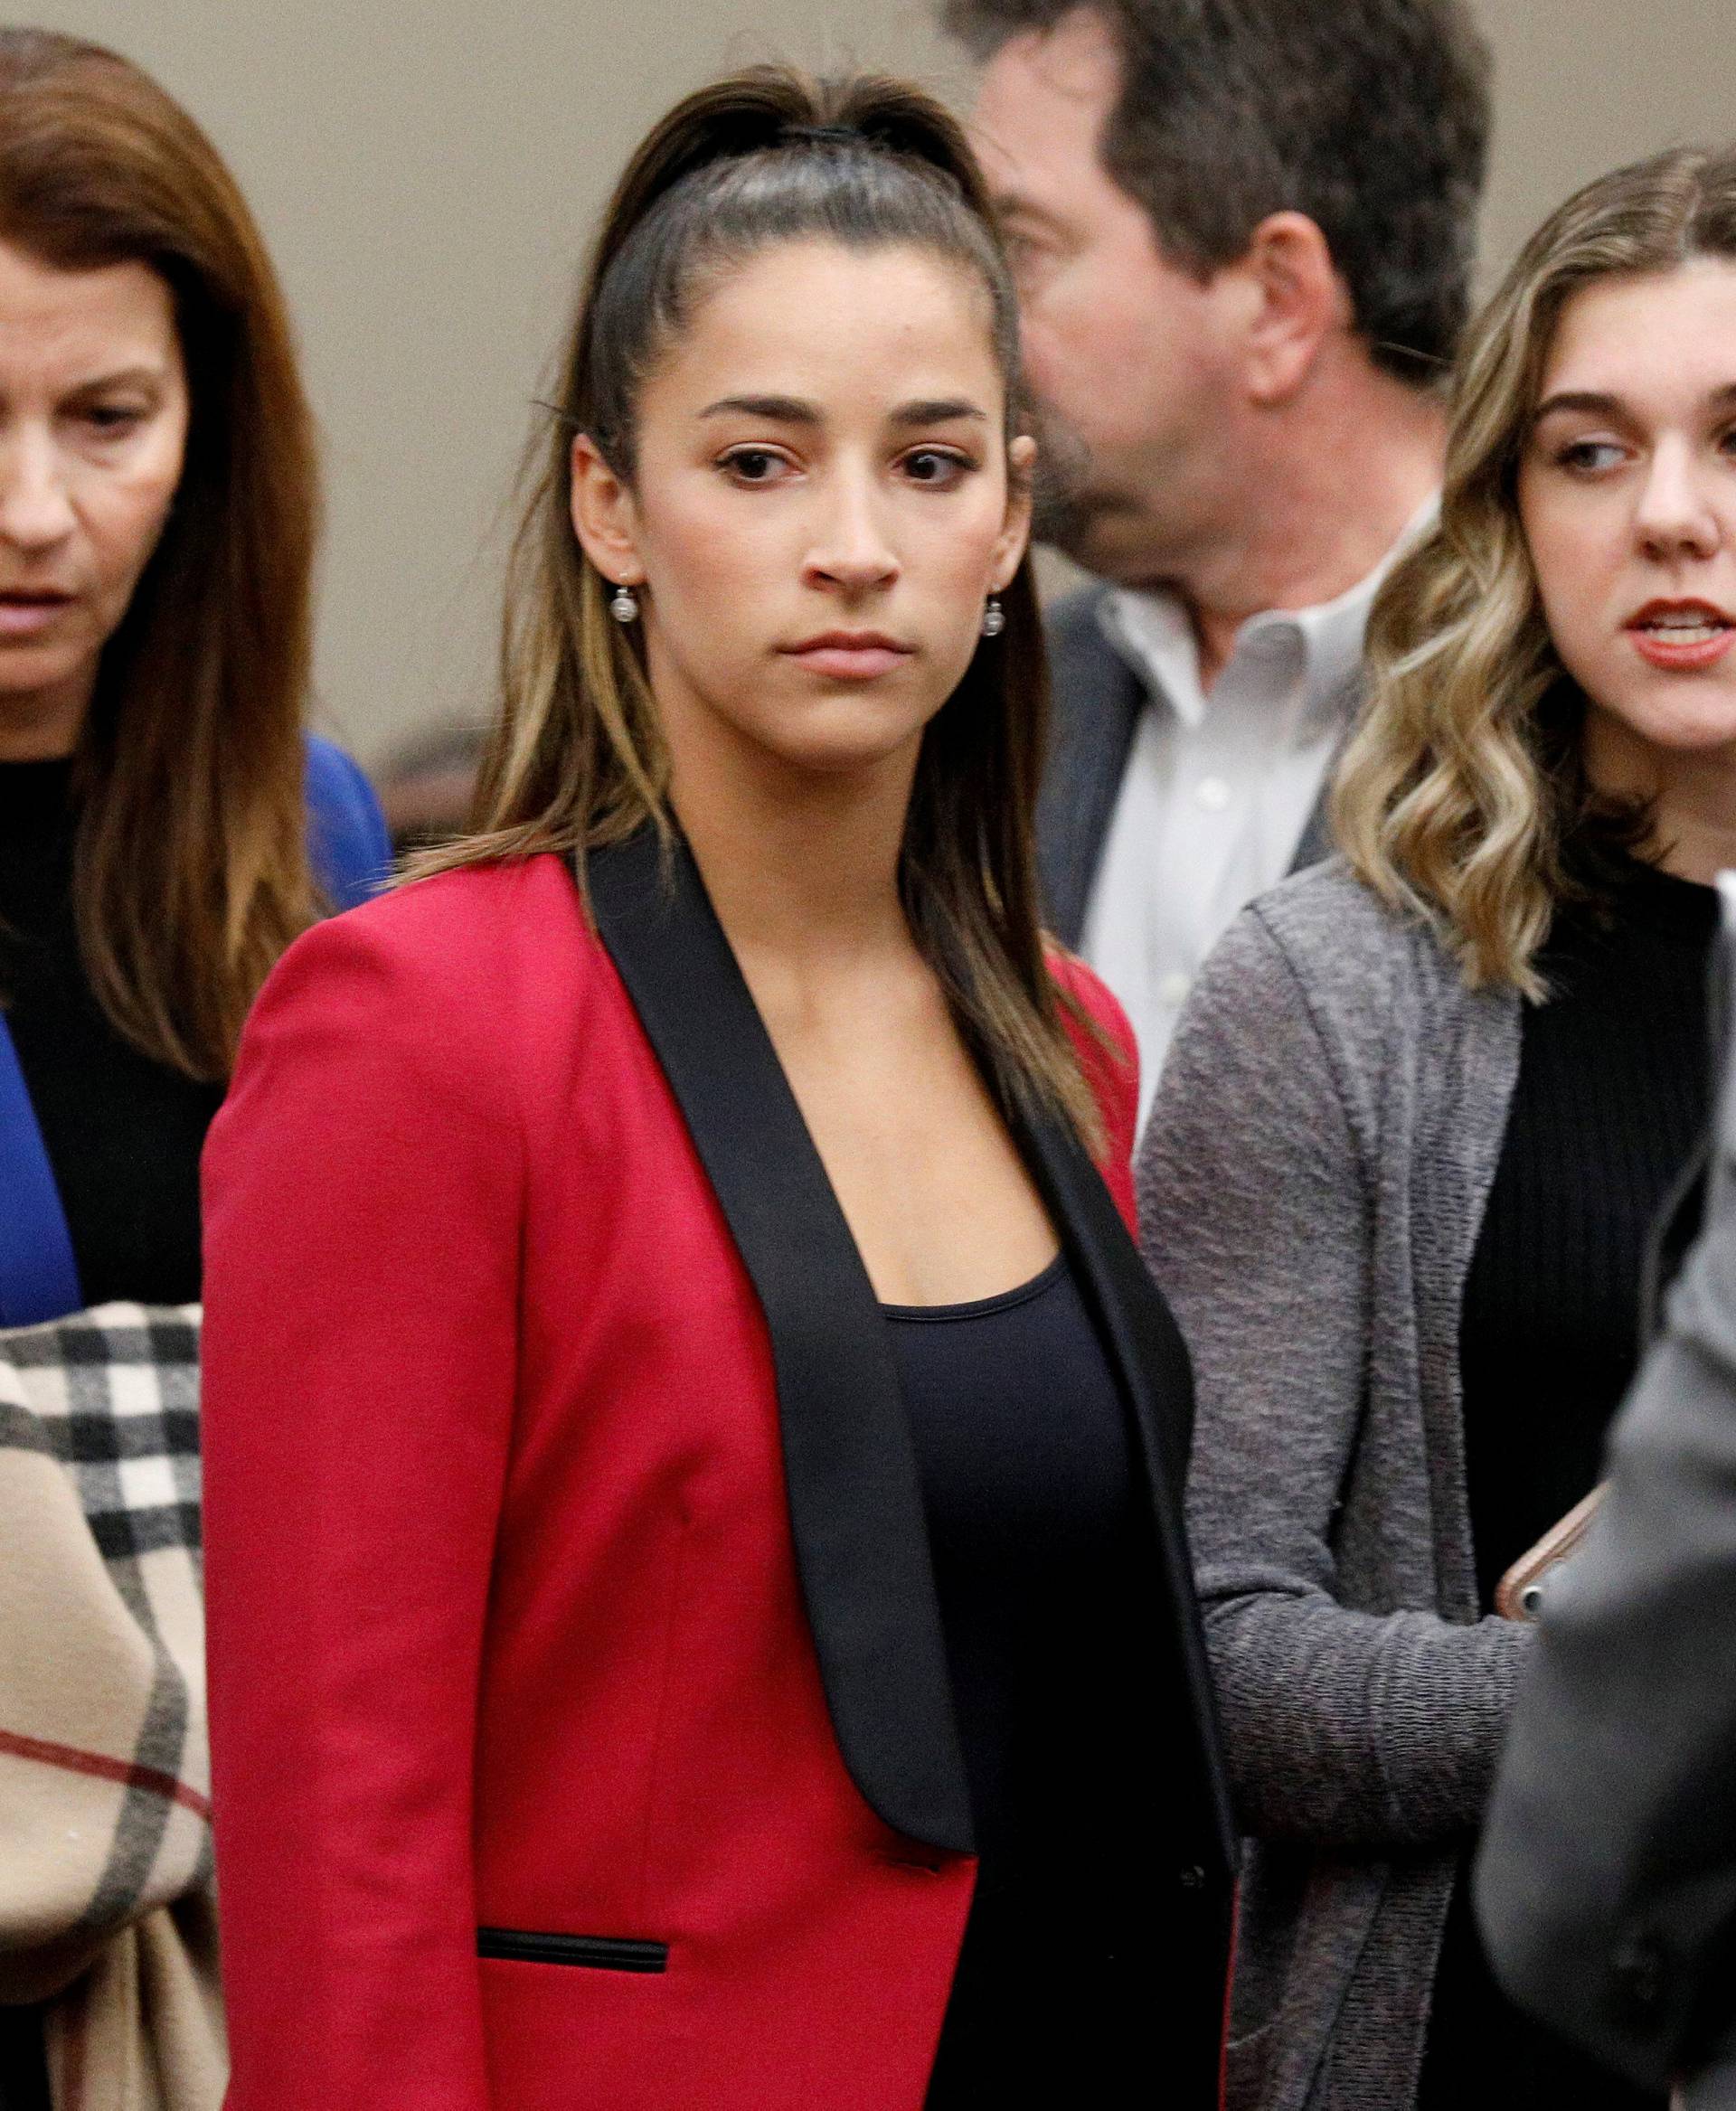 Victim and Olympic gold medalist Aly Raisman appears before speaking at the sentencing hearing for Larry Nassar, a former team USA Gymnastics doctor who pleaded guilty in November 2017 to sexual assault charges, in Lansing